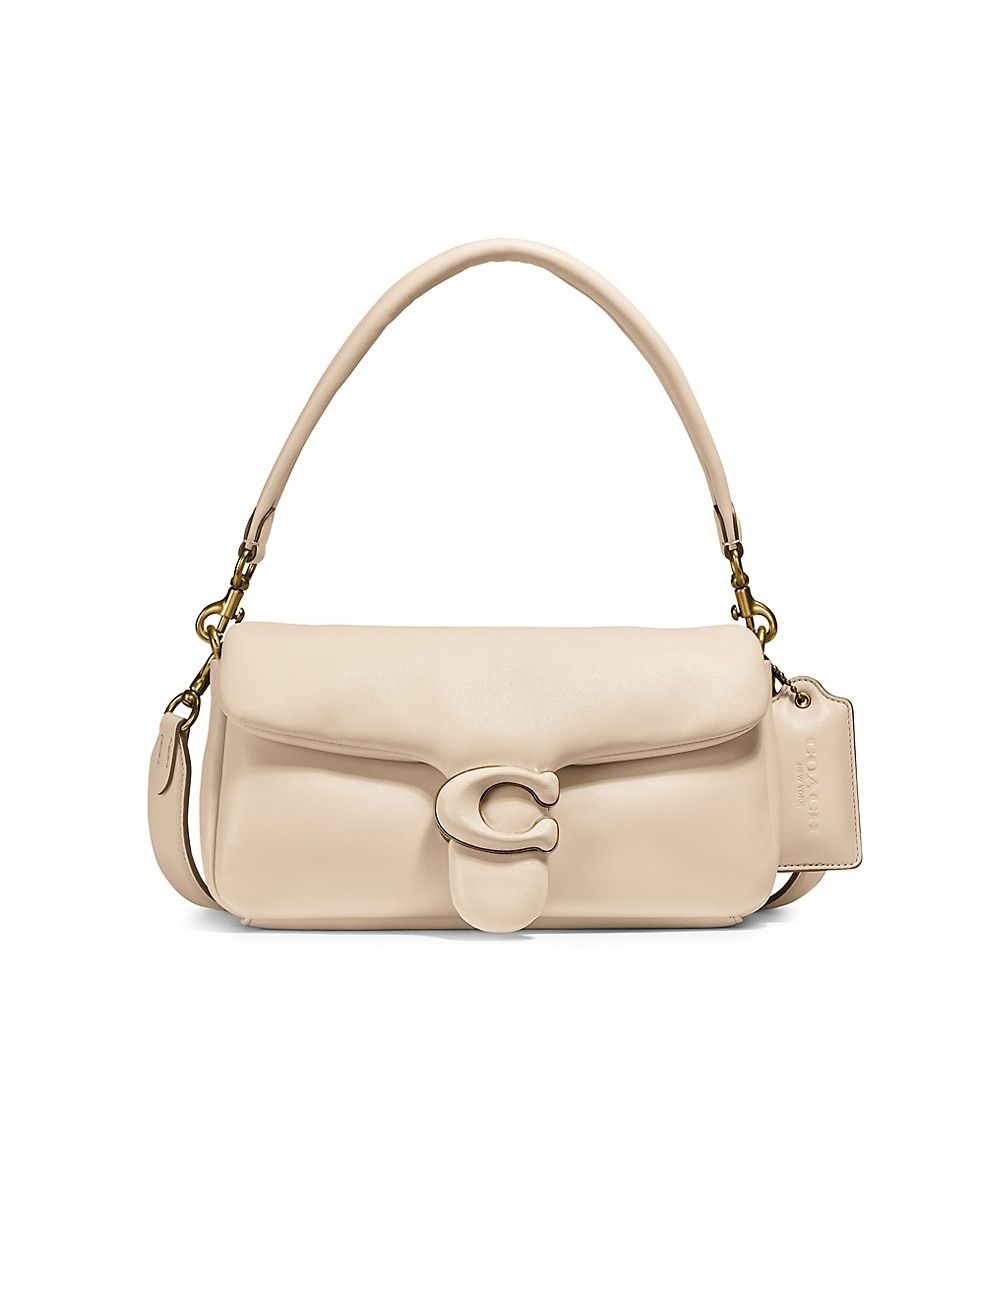 COACH Pillow Tabby 26 Leather Shoulder Bag | Saks Fifth Avenue